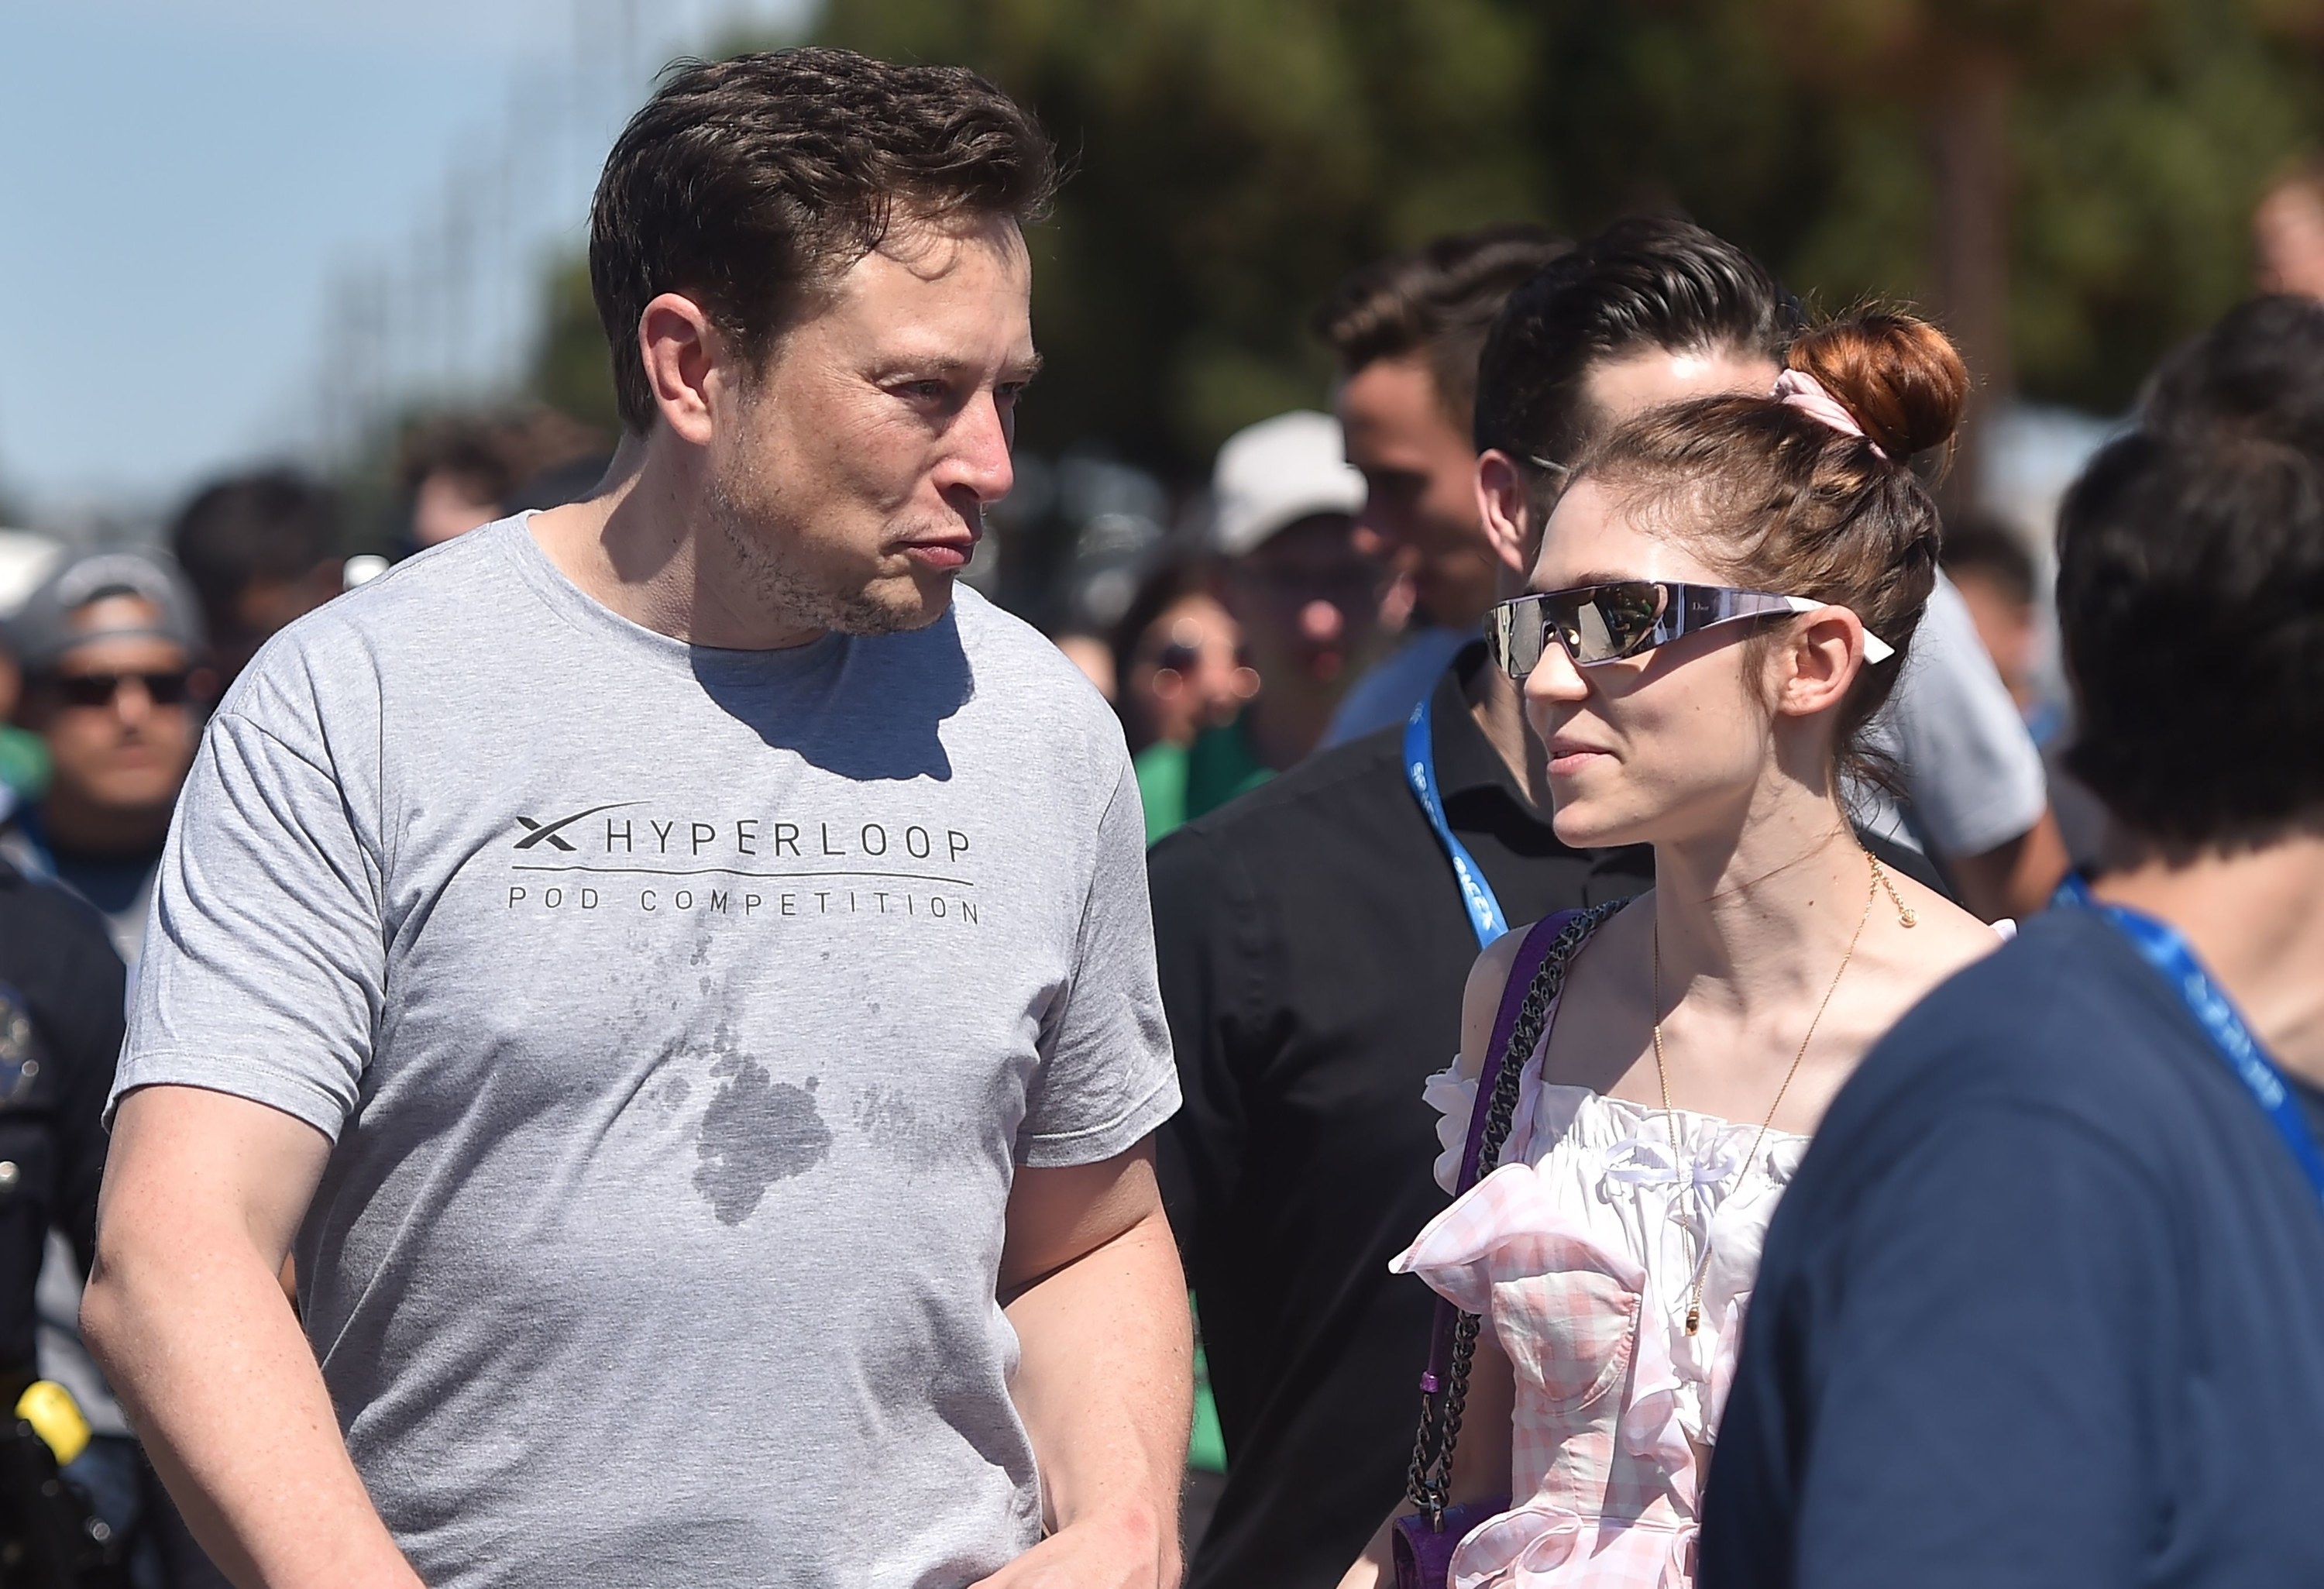 Elon and Grimes stand in a crowd of people